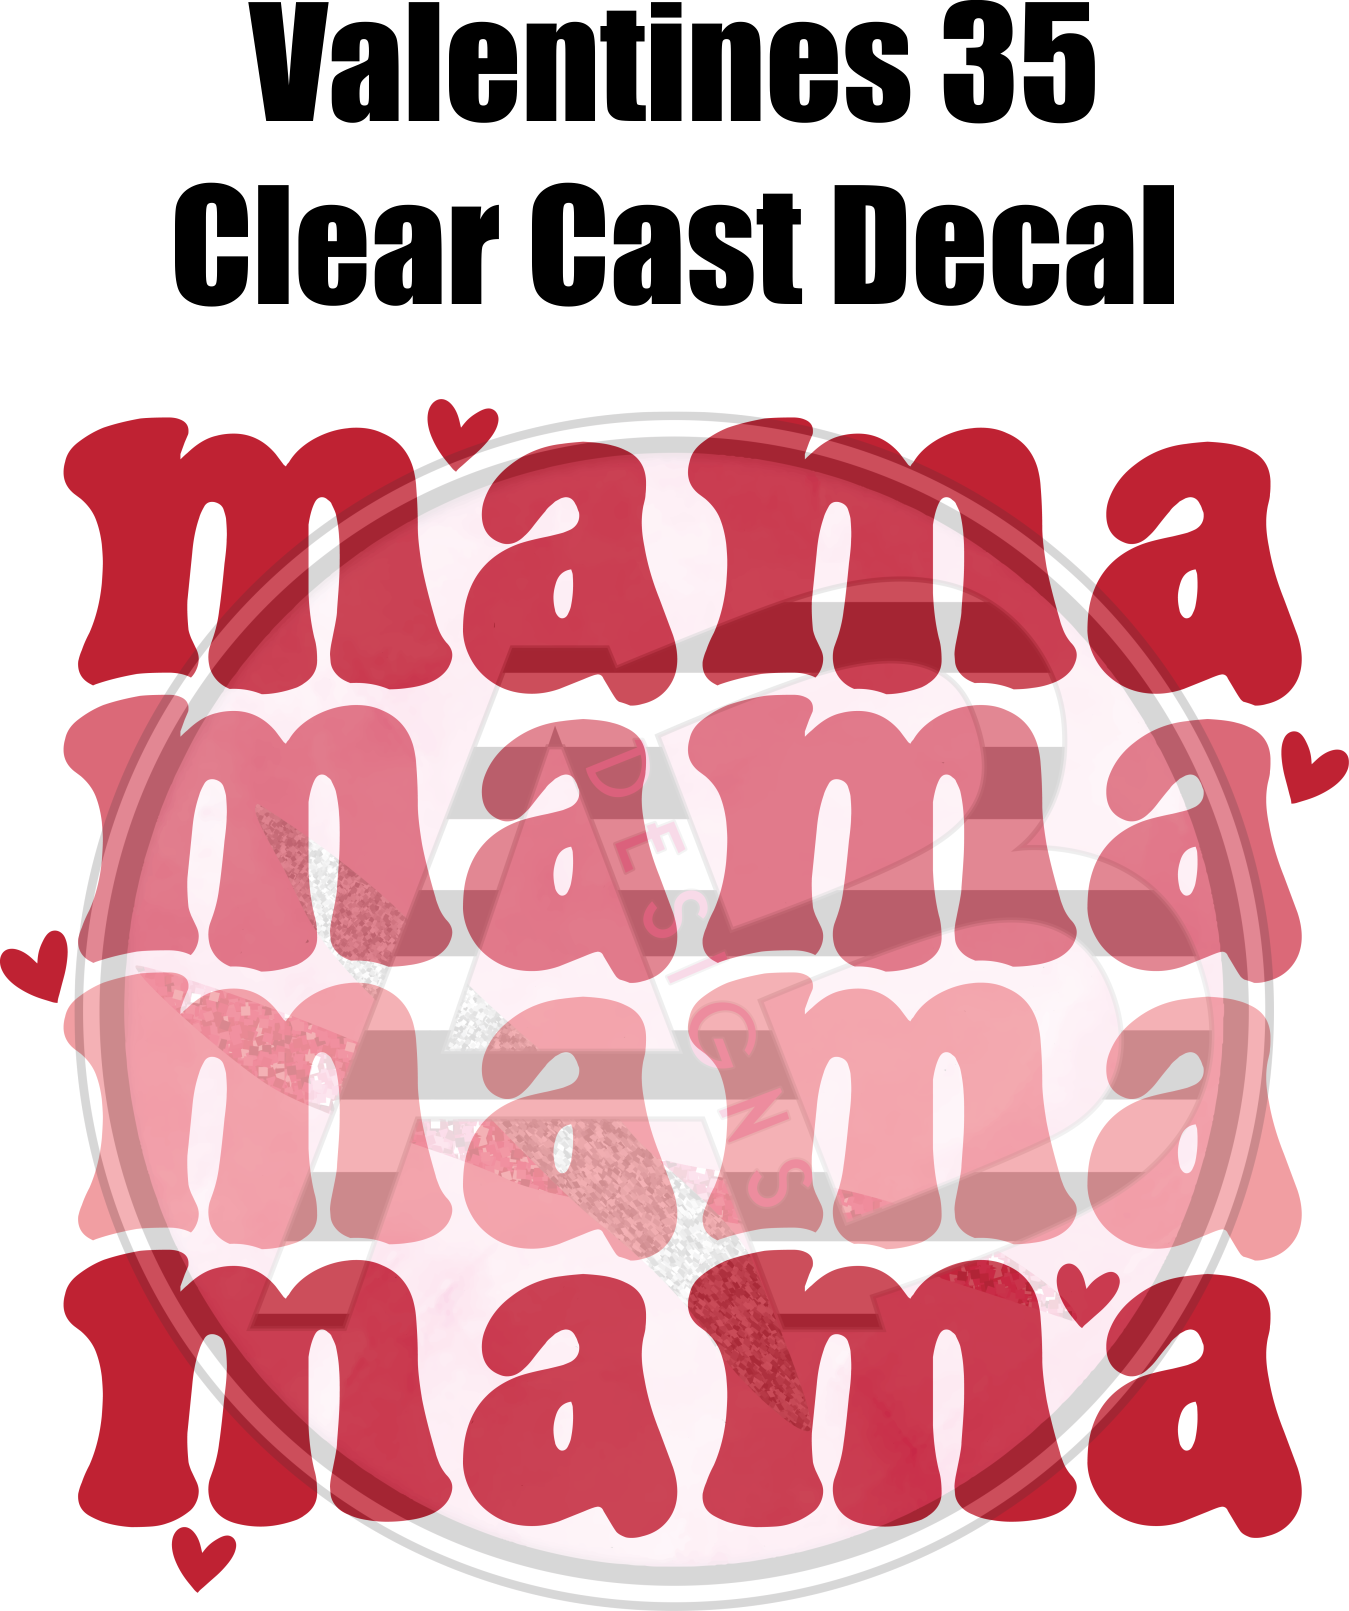 Valentines 35 - Clear Cast Decal